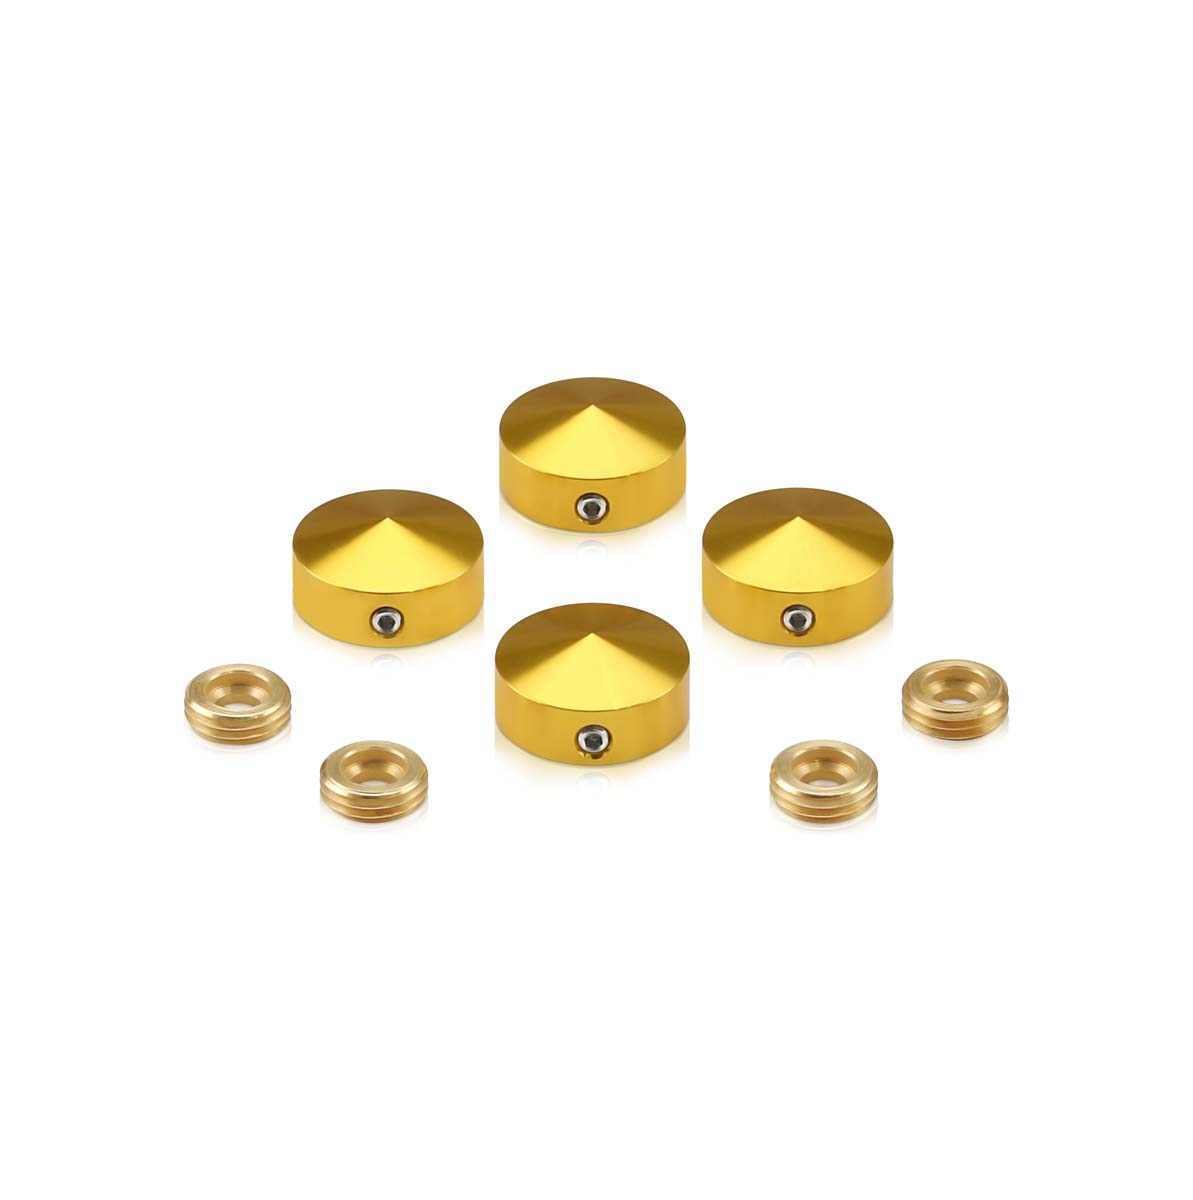 Set of 4 Conical Locking Screw Cover, Diameter: 11/16'' (Less 3/4''), Aluminum Gold Anodized Finish (Indoor or Outdoor Use)